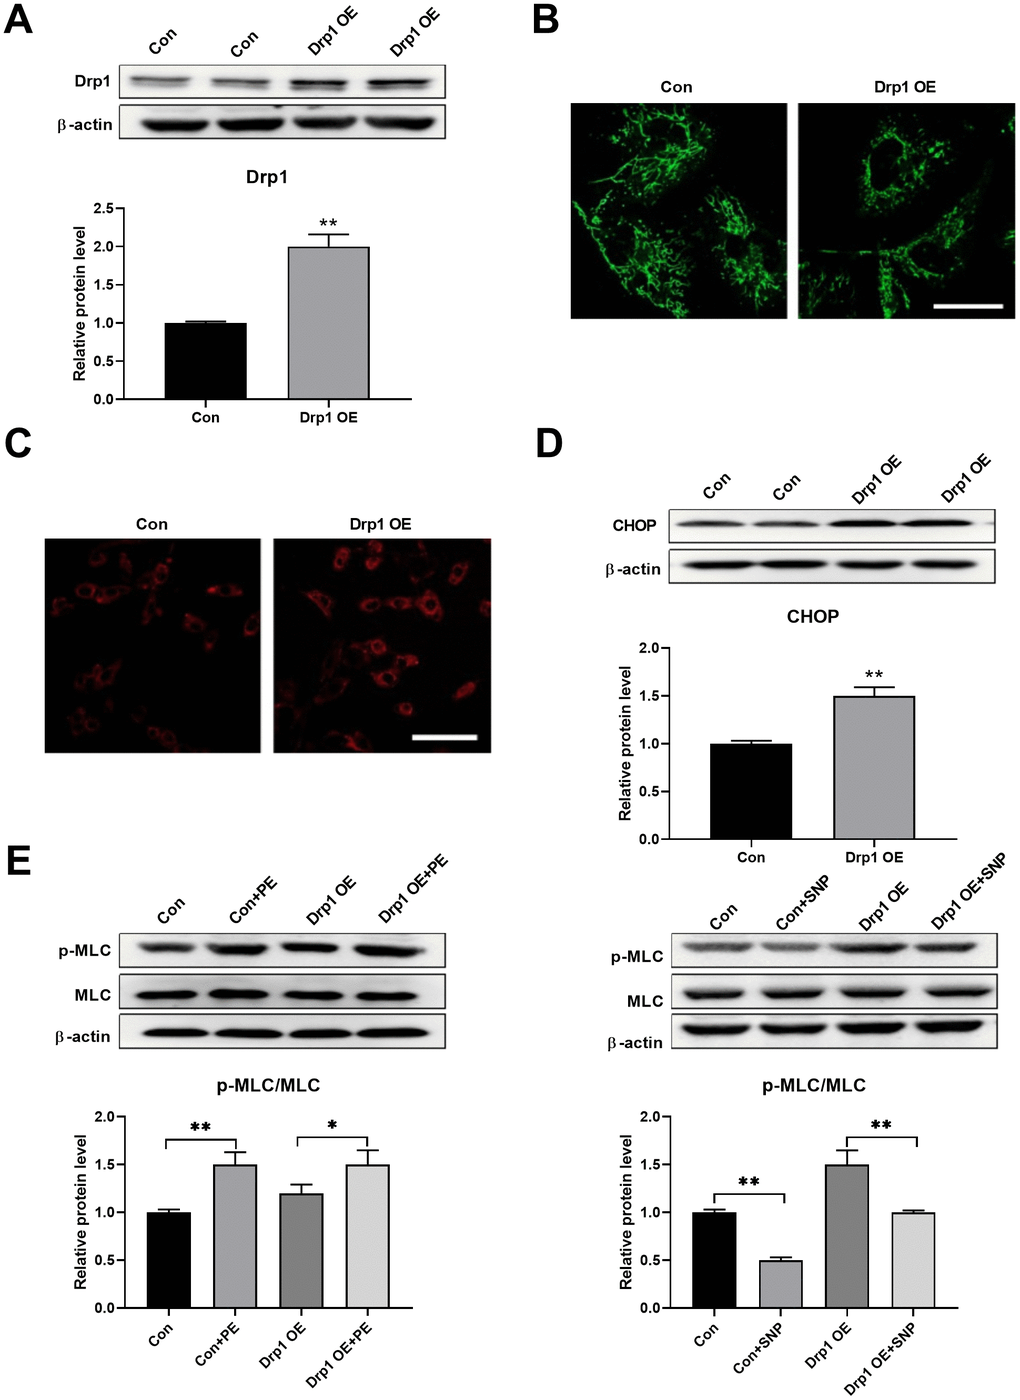 Drp1 overexpression induced ER stress. (A) Drp1 was overexpressed by adenovirus in PASMCs. Twenty micrograms of protein was loaded for each lane. (B) Overexpression of Drp1 induced mitochondrial fragmentation as detected by mitoTracker. Scale bar, 20 μm. (C) Overexpression of Drp1 increased mitochondrial ROS as detected by mitoSOX. Scale bar, 100 μm. (D) Drp1 overexpression increased CHOP expression in PASMCs. Twenty micrograms of protein was loaded for each lane. (E) Drp1 overexpression decreased PASMCs function as evidenced by decreased PE/SNP-induced MLC phosphorylation/dephosphorylation in PASMCs. Twenty micrograms of protein was loaded in each lane. *, p p 